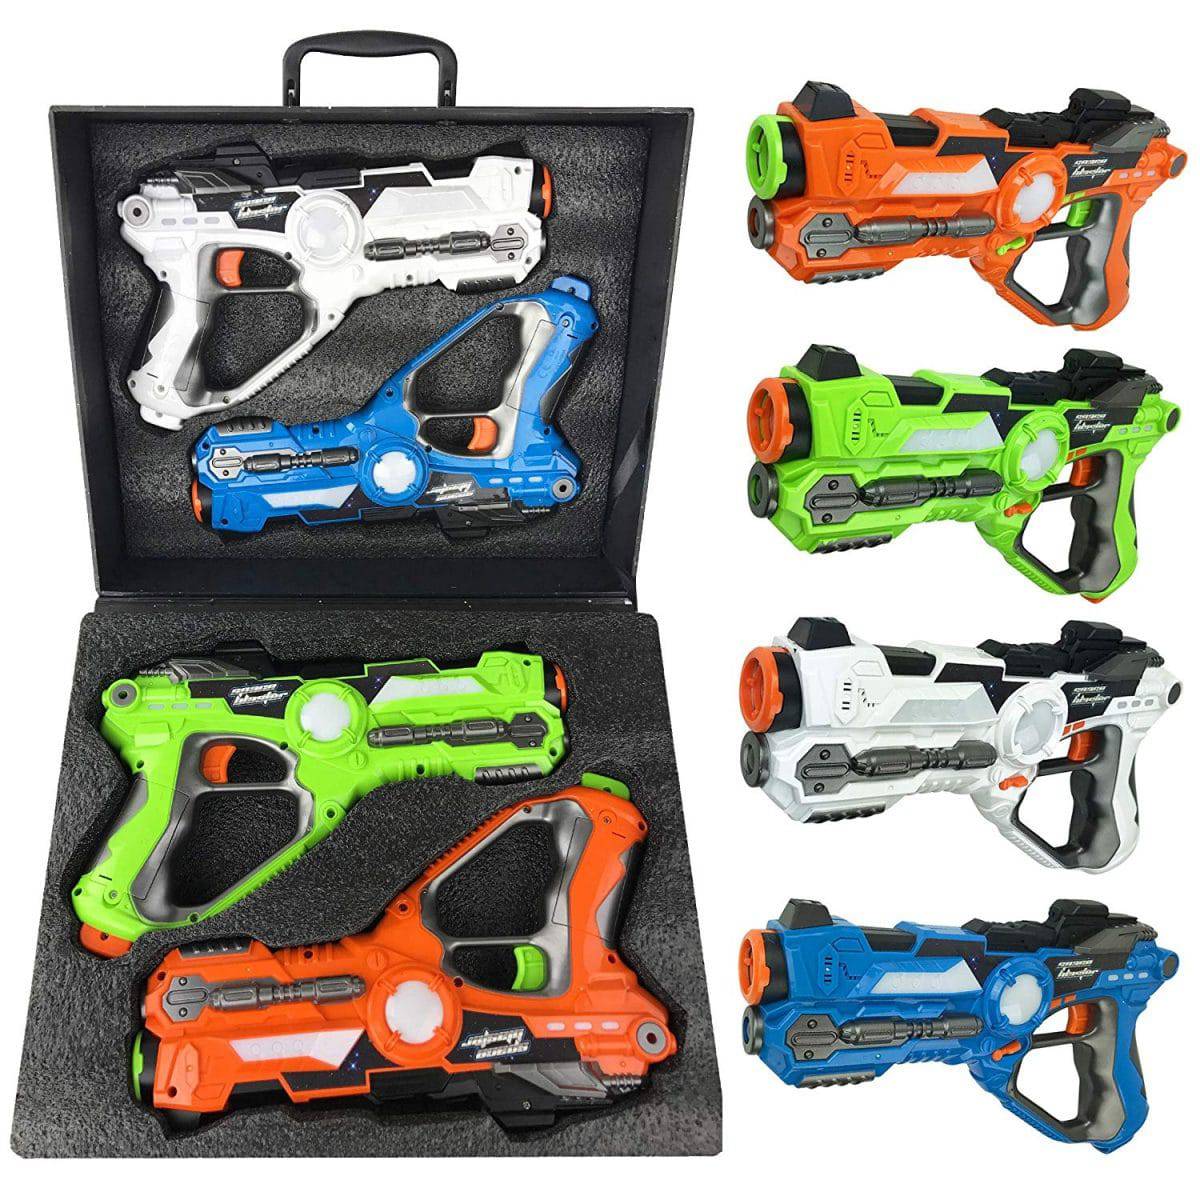 4 NEW BATTERY OPERATED PISTOLS 9/" HANDGUN ACTION REVOLVER WITH LIGHTS AND SOUND